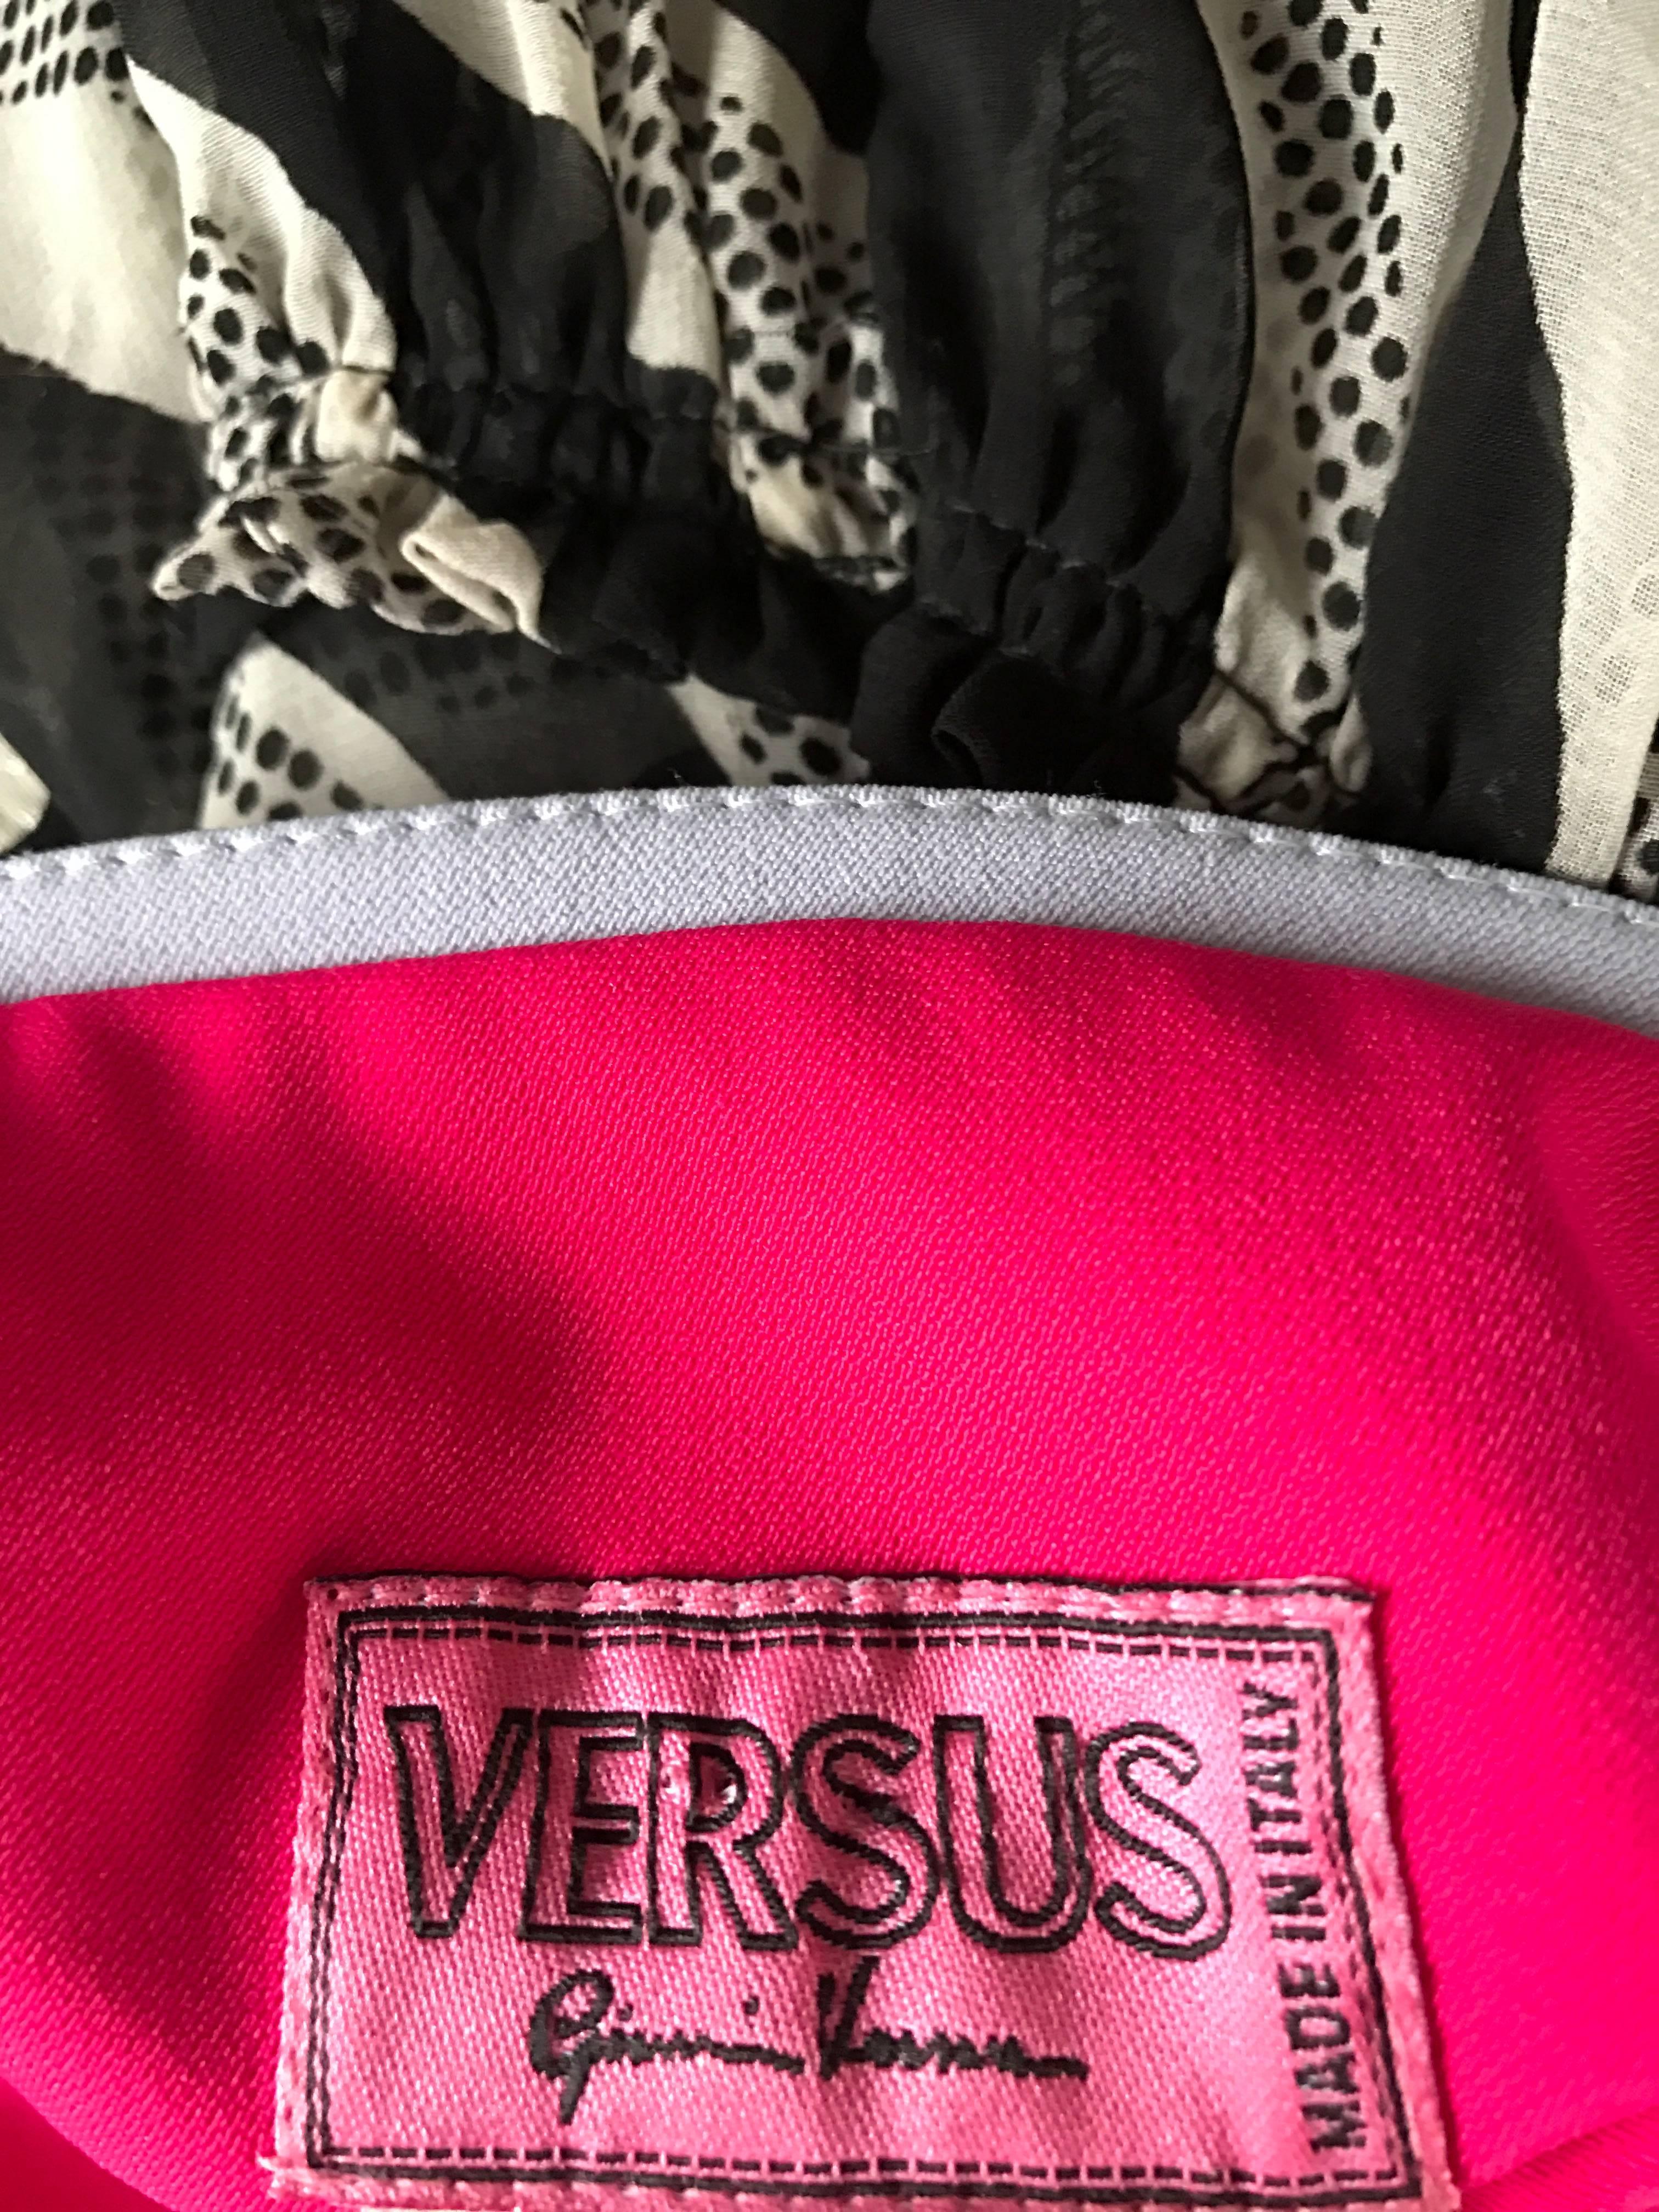 Sexy Vintage Gianni Versace Versus 1990s Hot Pink Fuchsia 90s Strapless Dress For Sale 3